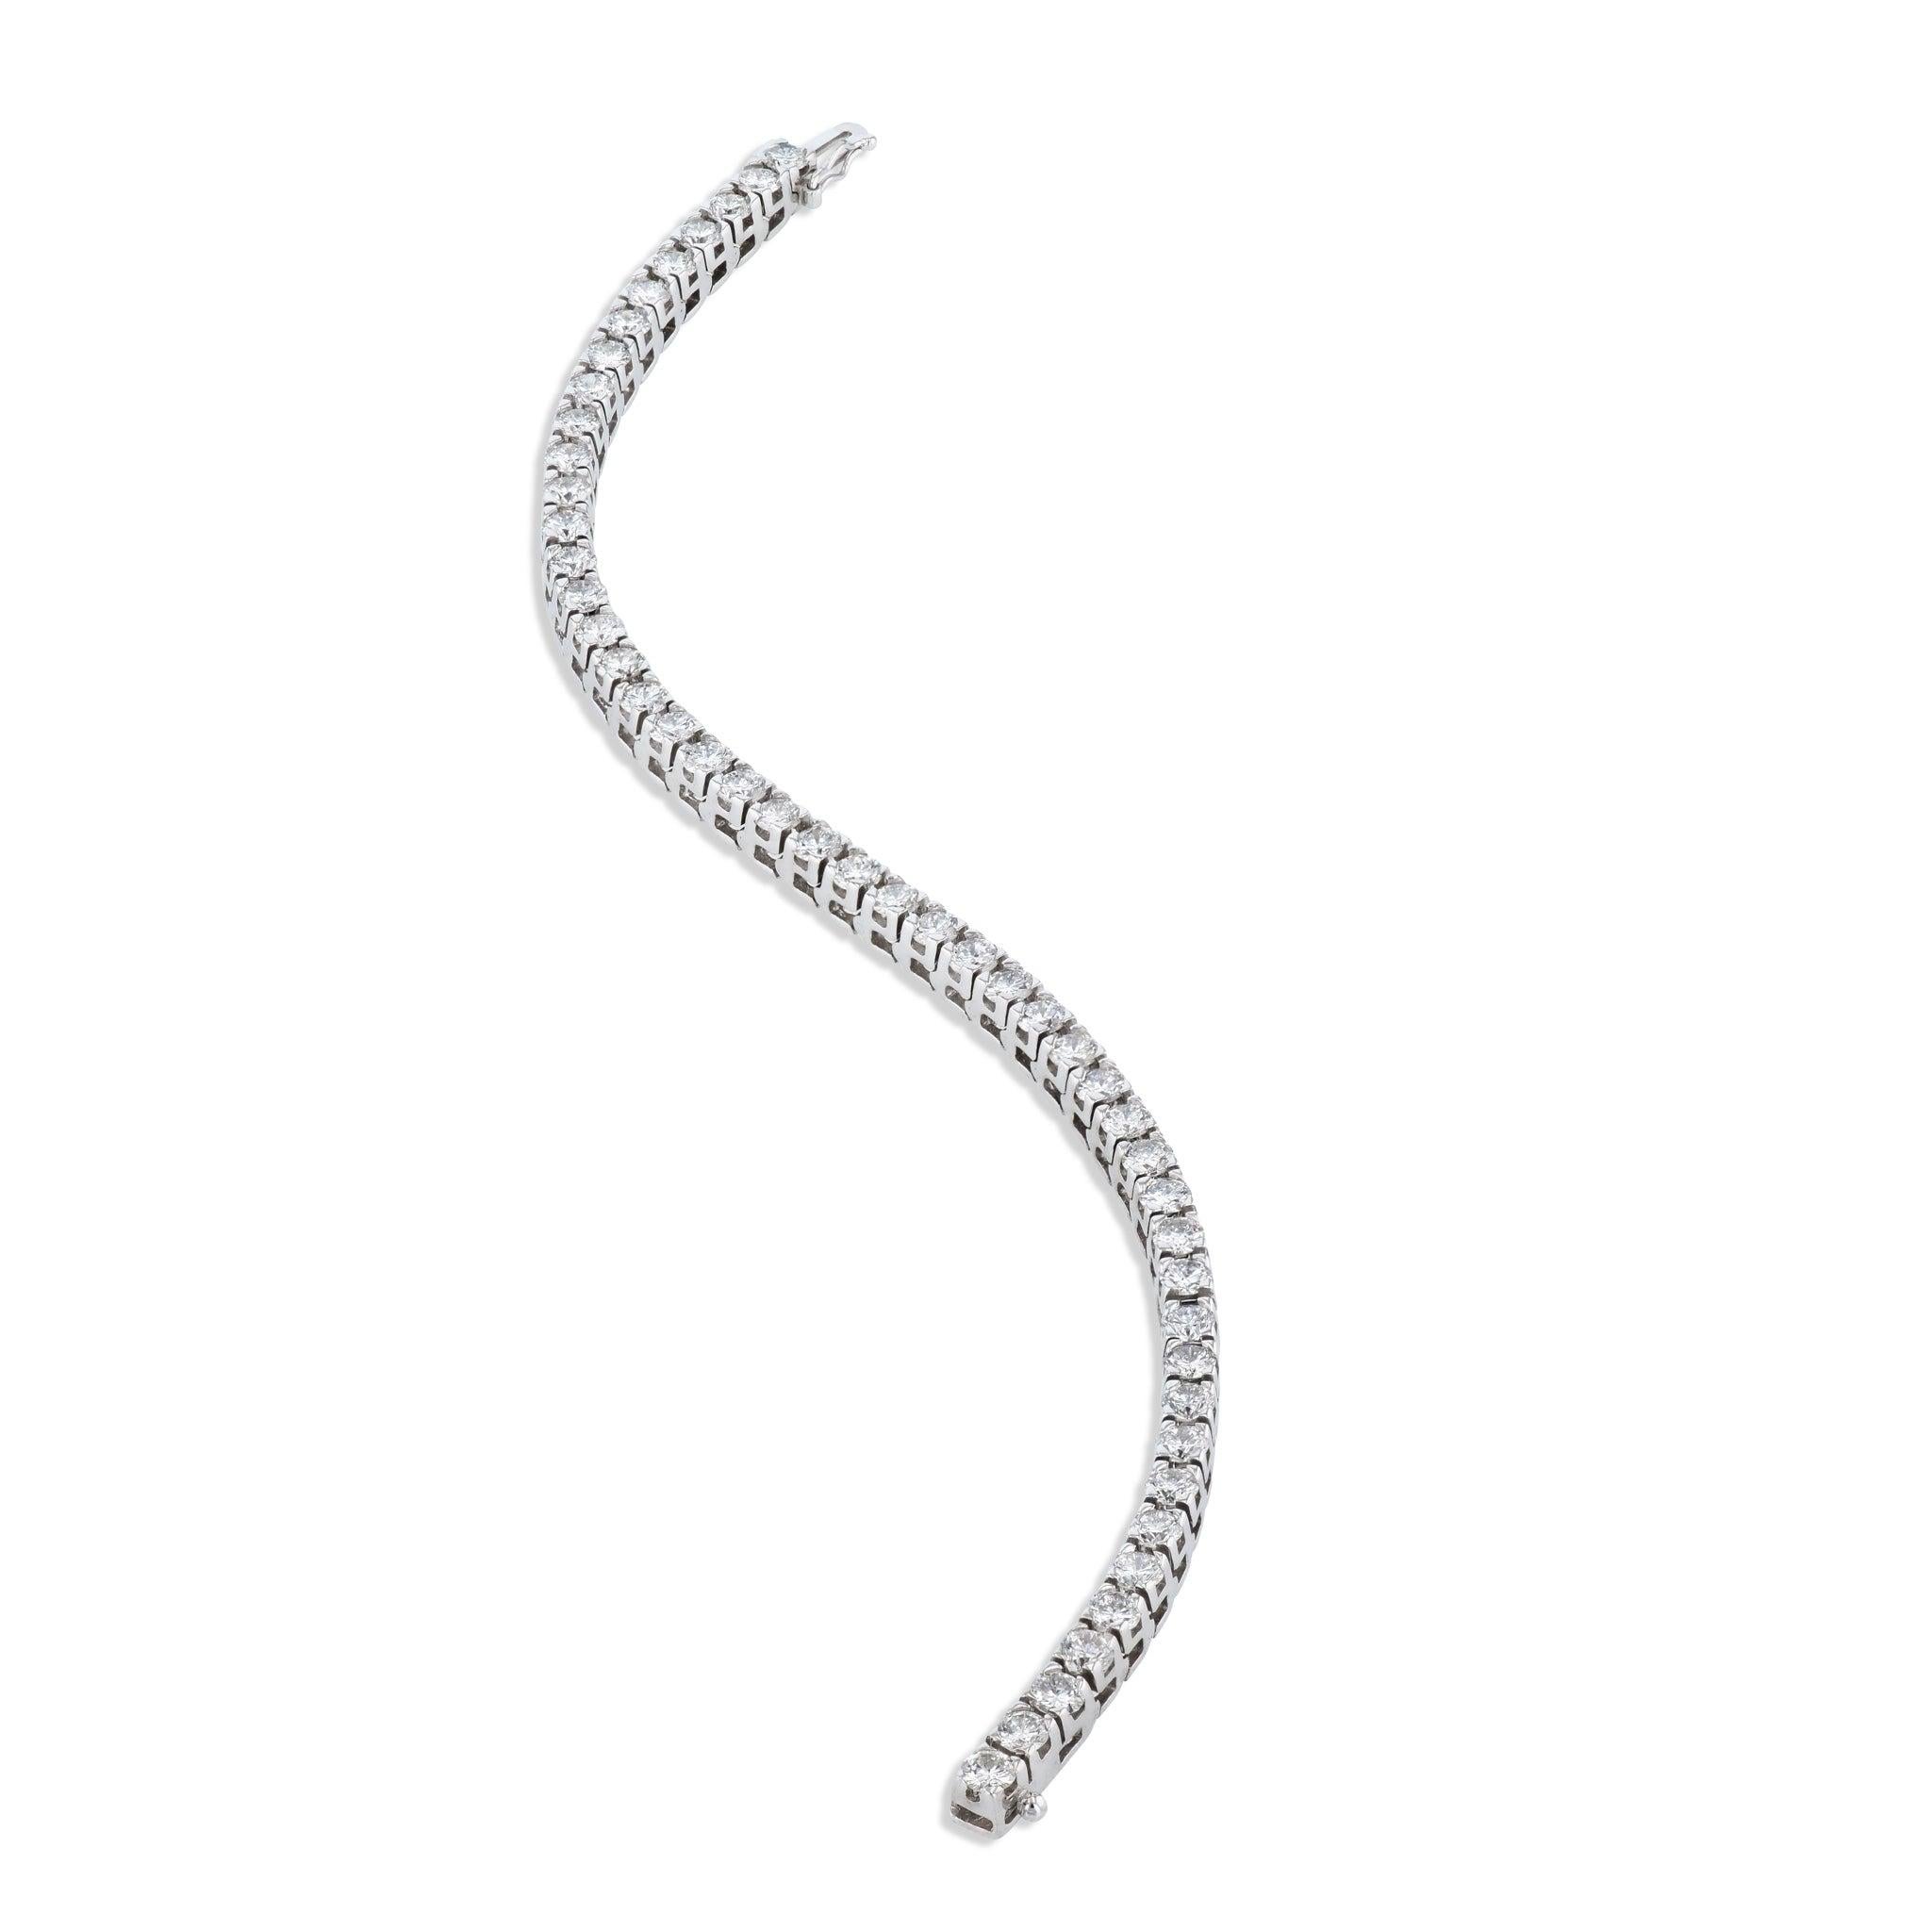 Stunning White Gold Diamond Estate Tennis Bracelet crafted in 14kt. White Gold. Exquisite diamonds with an approximate weight of 6.00cts. Lustrous and brilliant estate bracelet that will make any outfit sparkle!
White Gold Diamond Estate Tennis